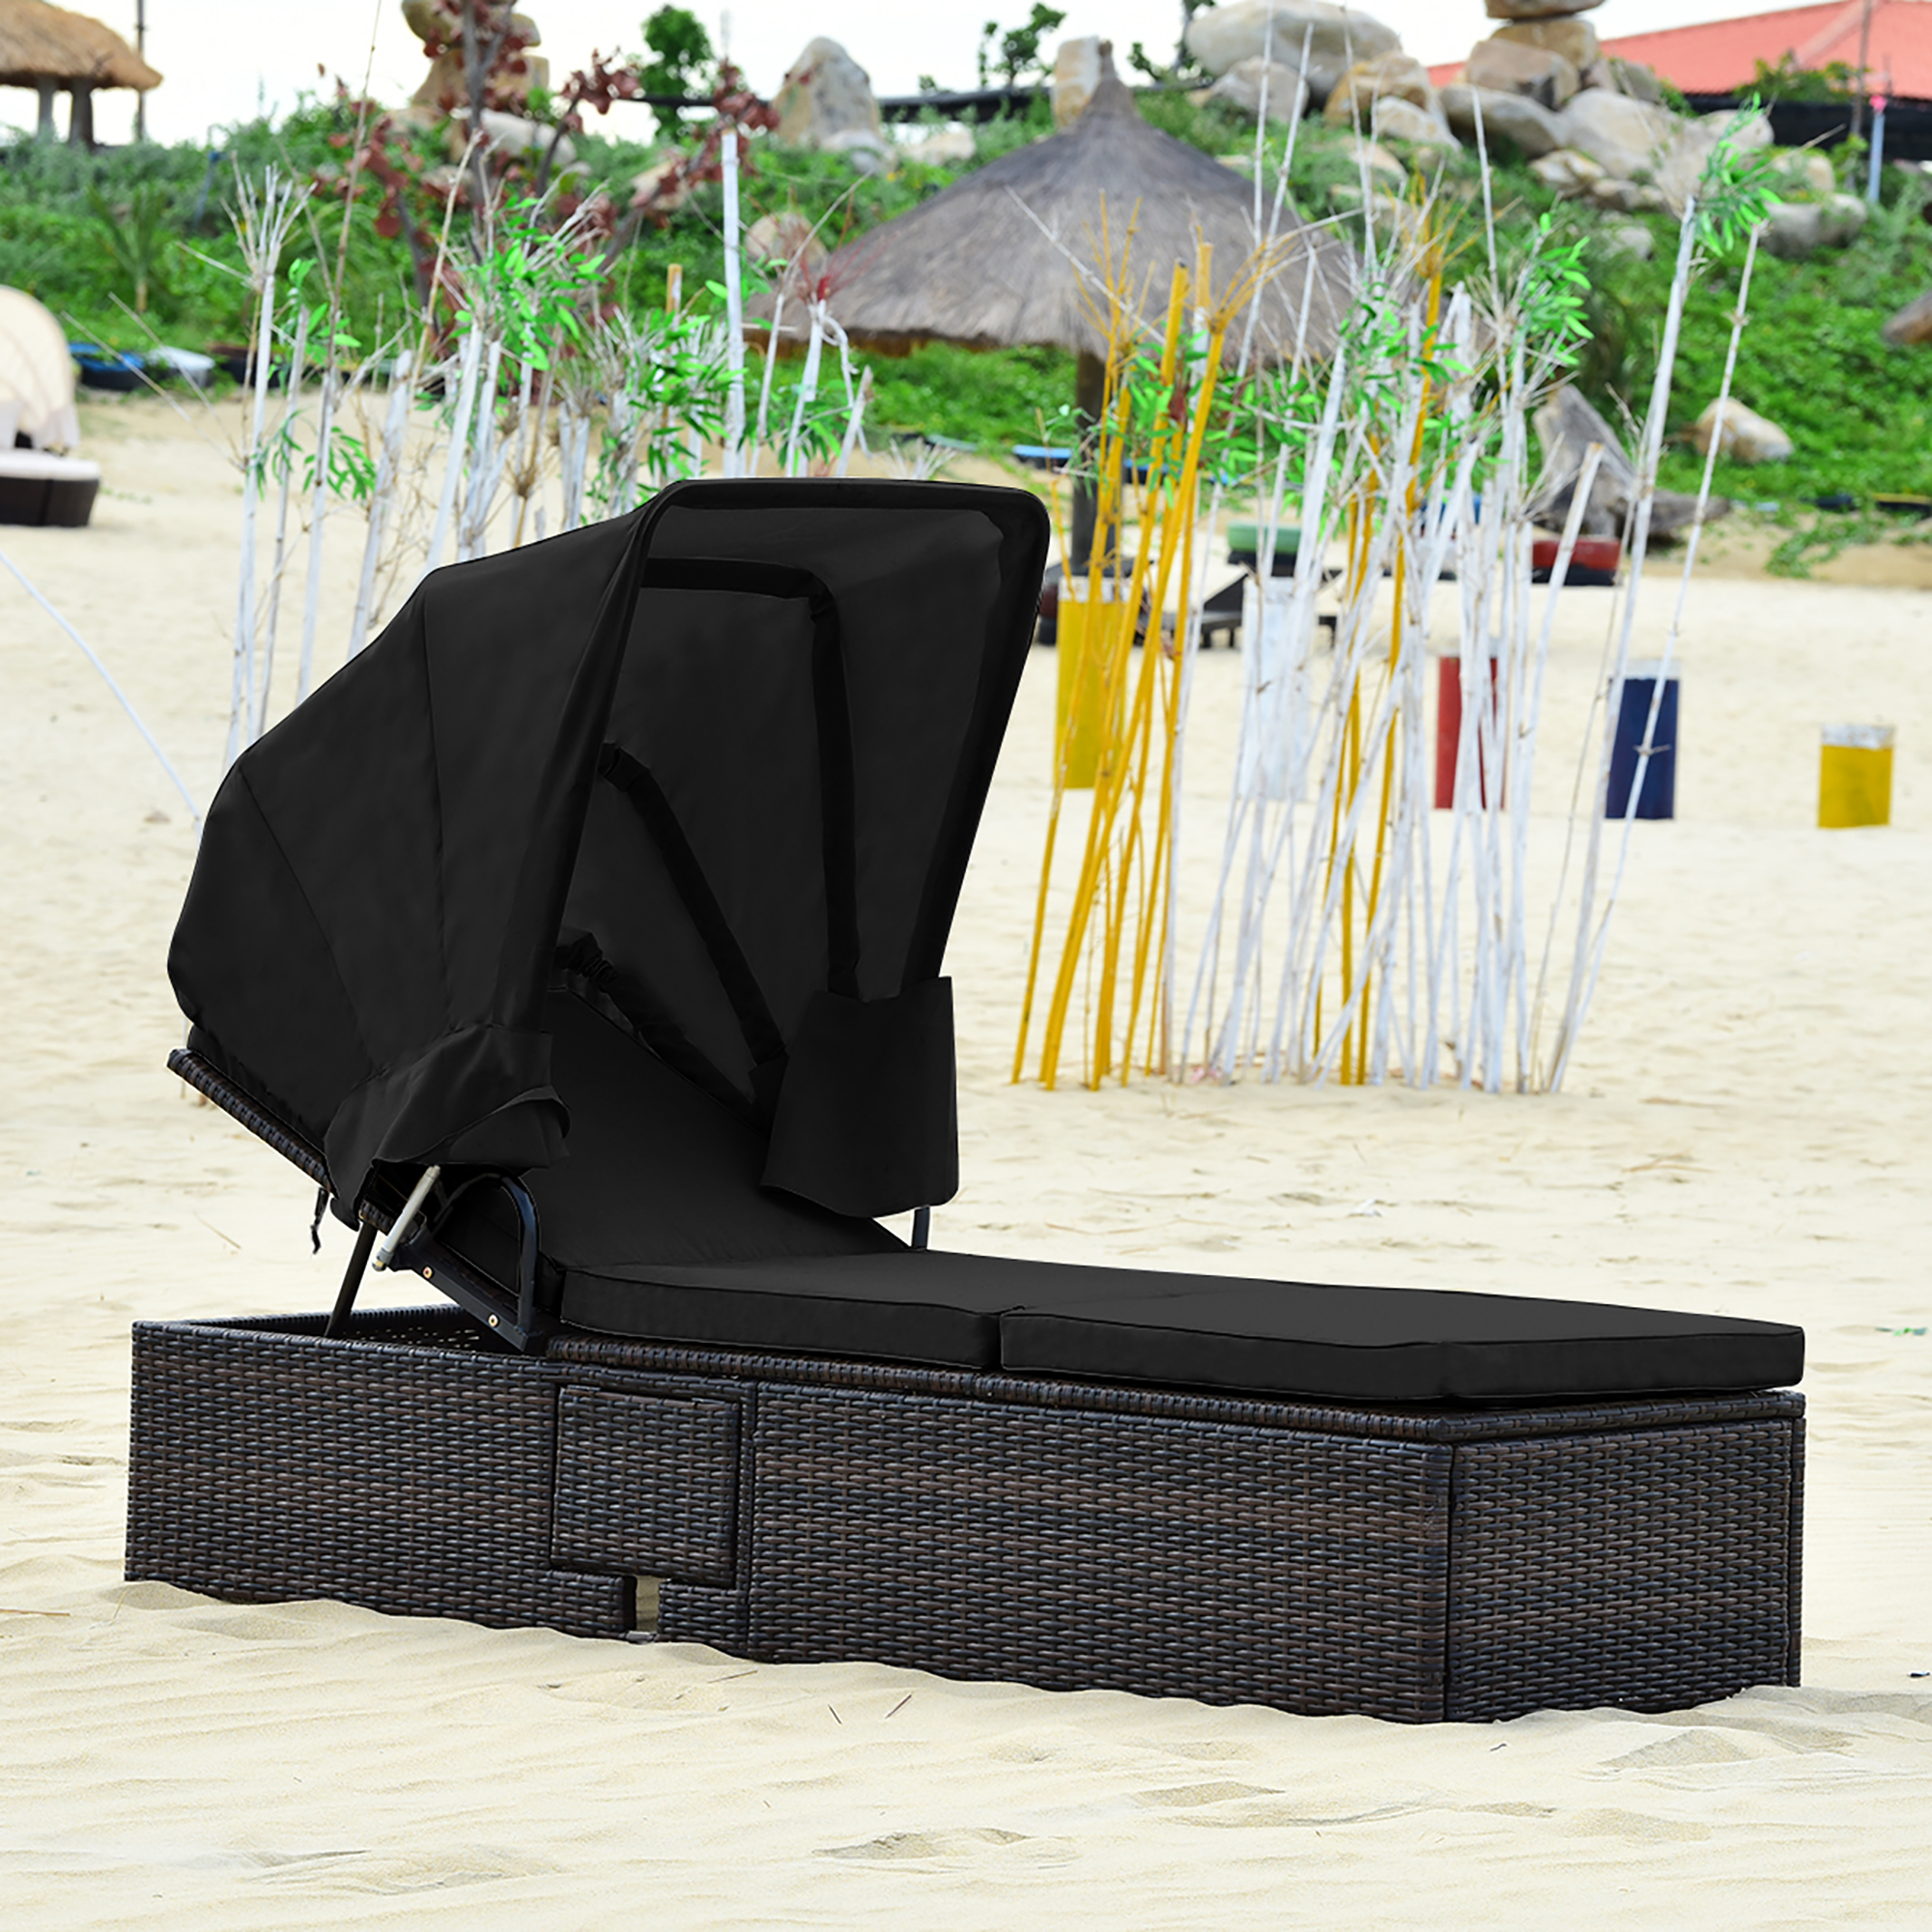 Costway Patio Rattan Lounge Chair Chaise Cushioned Top Canopy Adjustable Tea Table Black - image 2 of 10